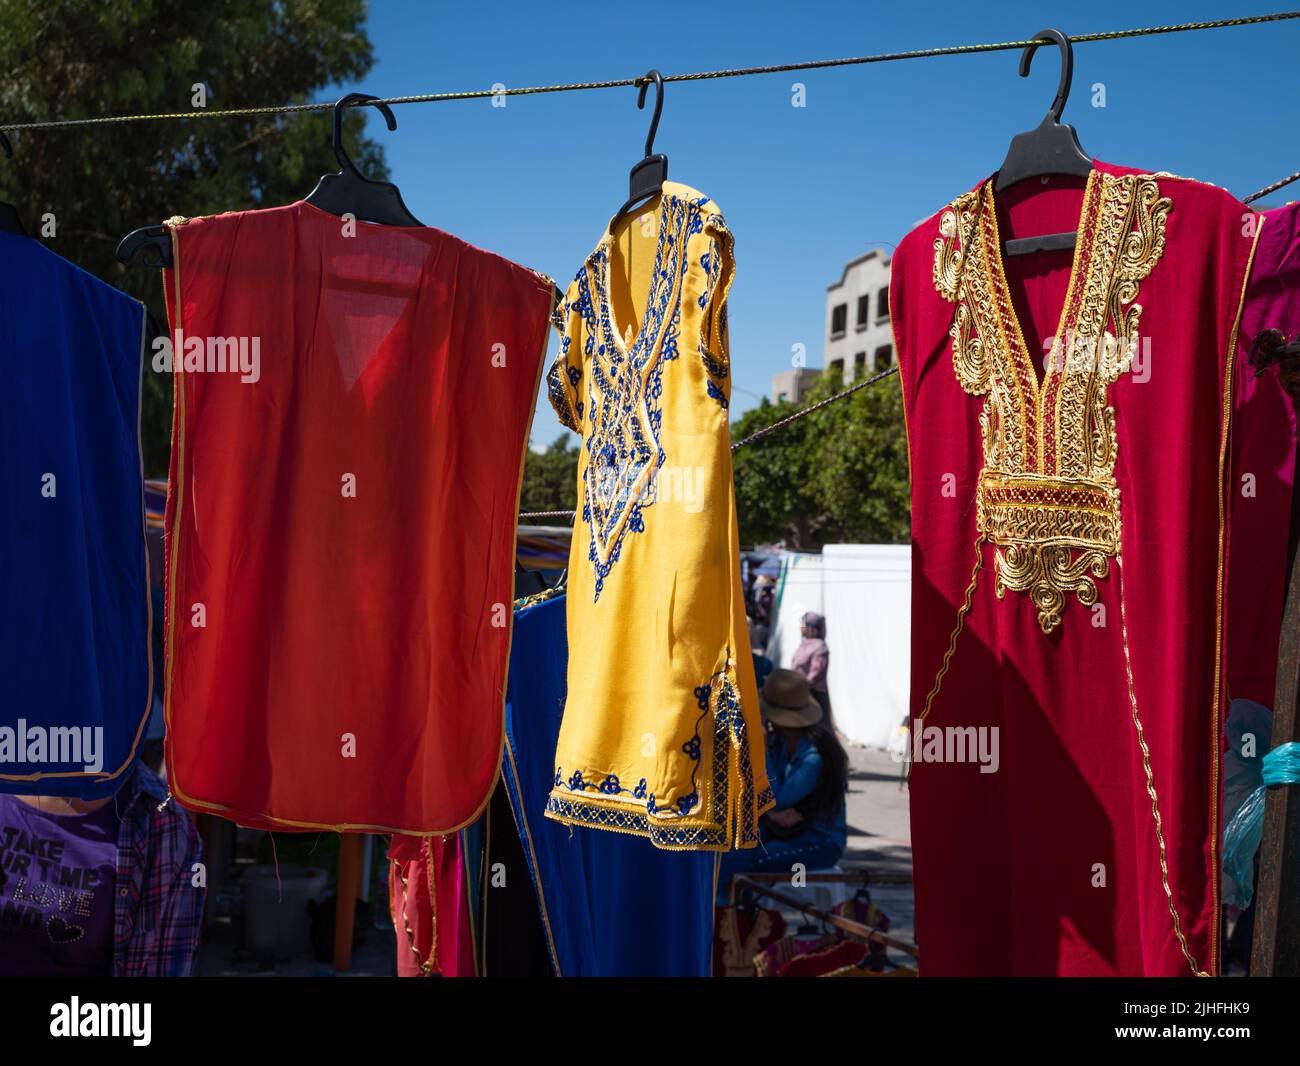 Traditional embroidered women's dresses for sale in the Sunday Souk, a weekly market in Sousse, Tunisia. Stock Photo